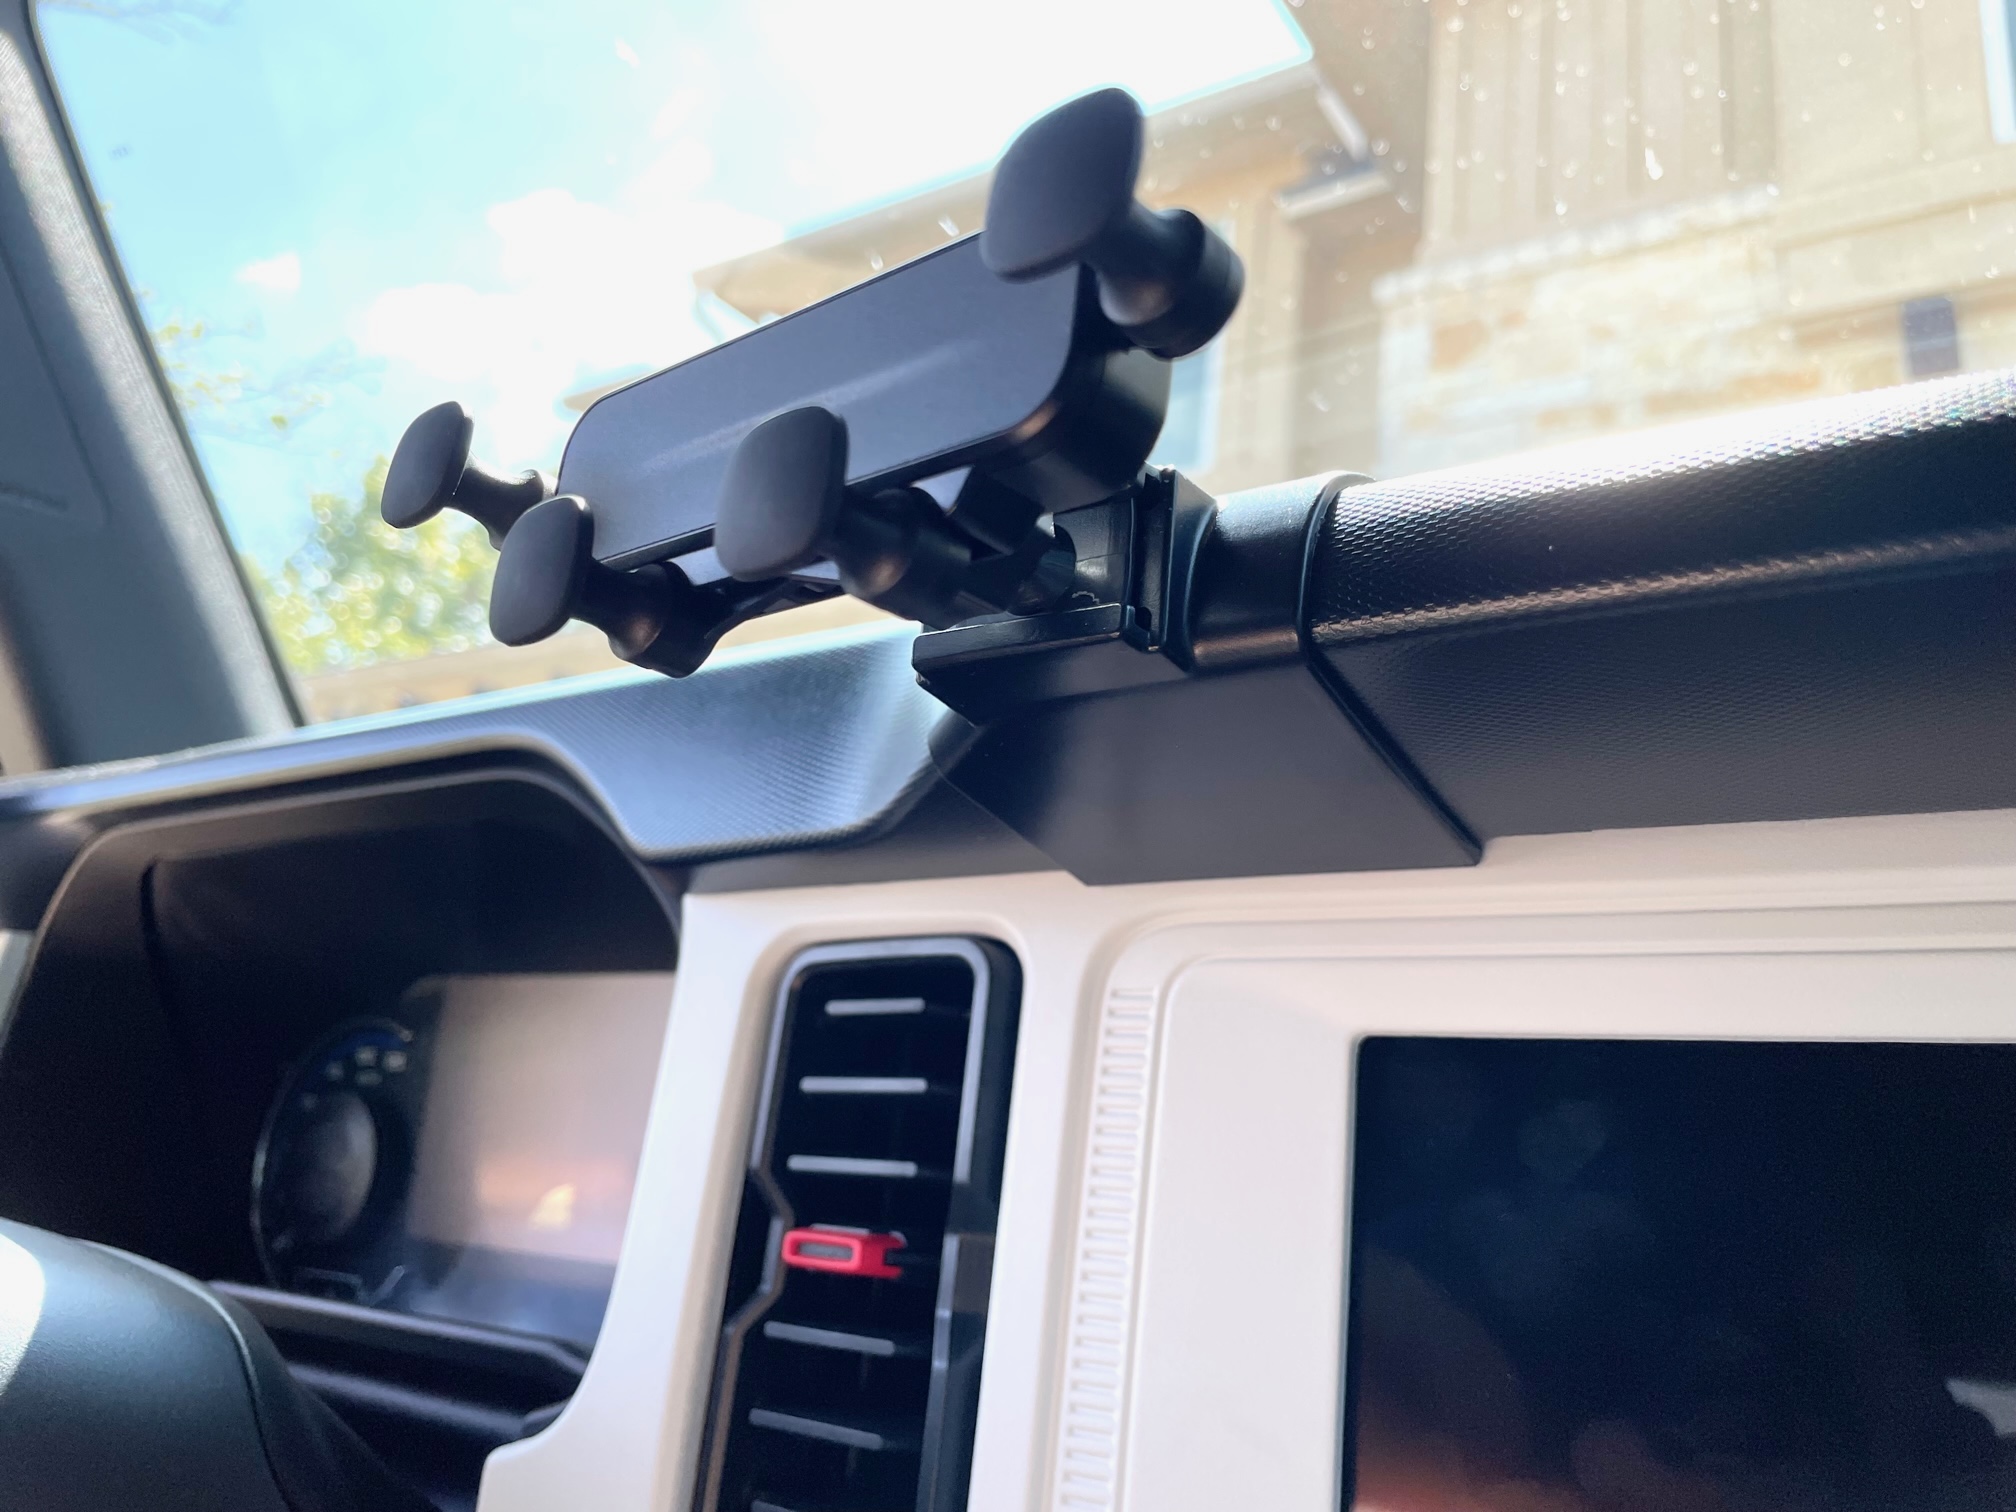 Ford Bronco Bronco specific phone mount IMG_7244